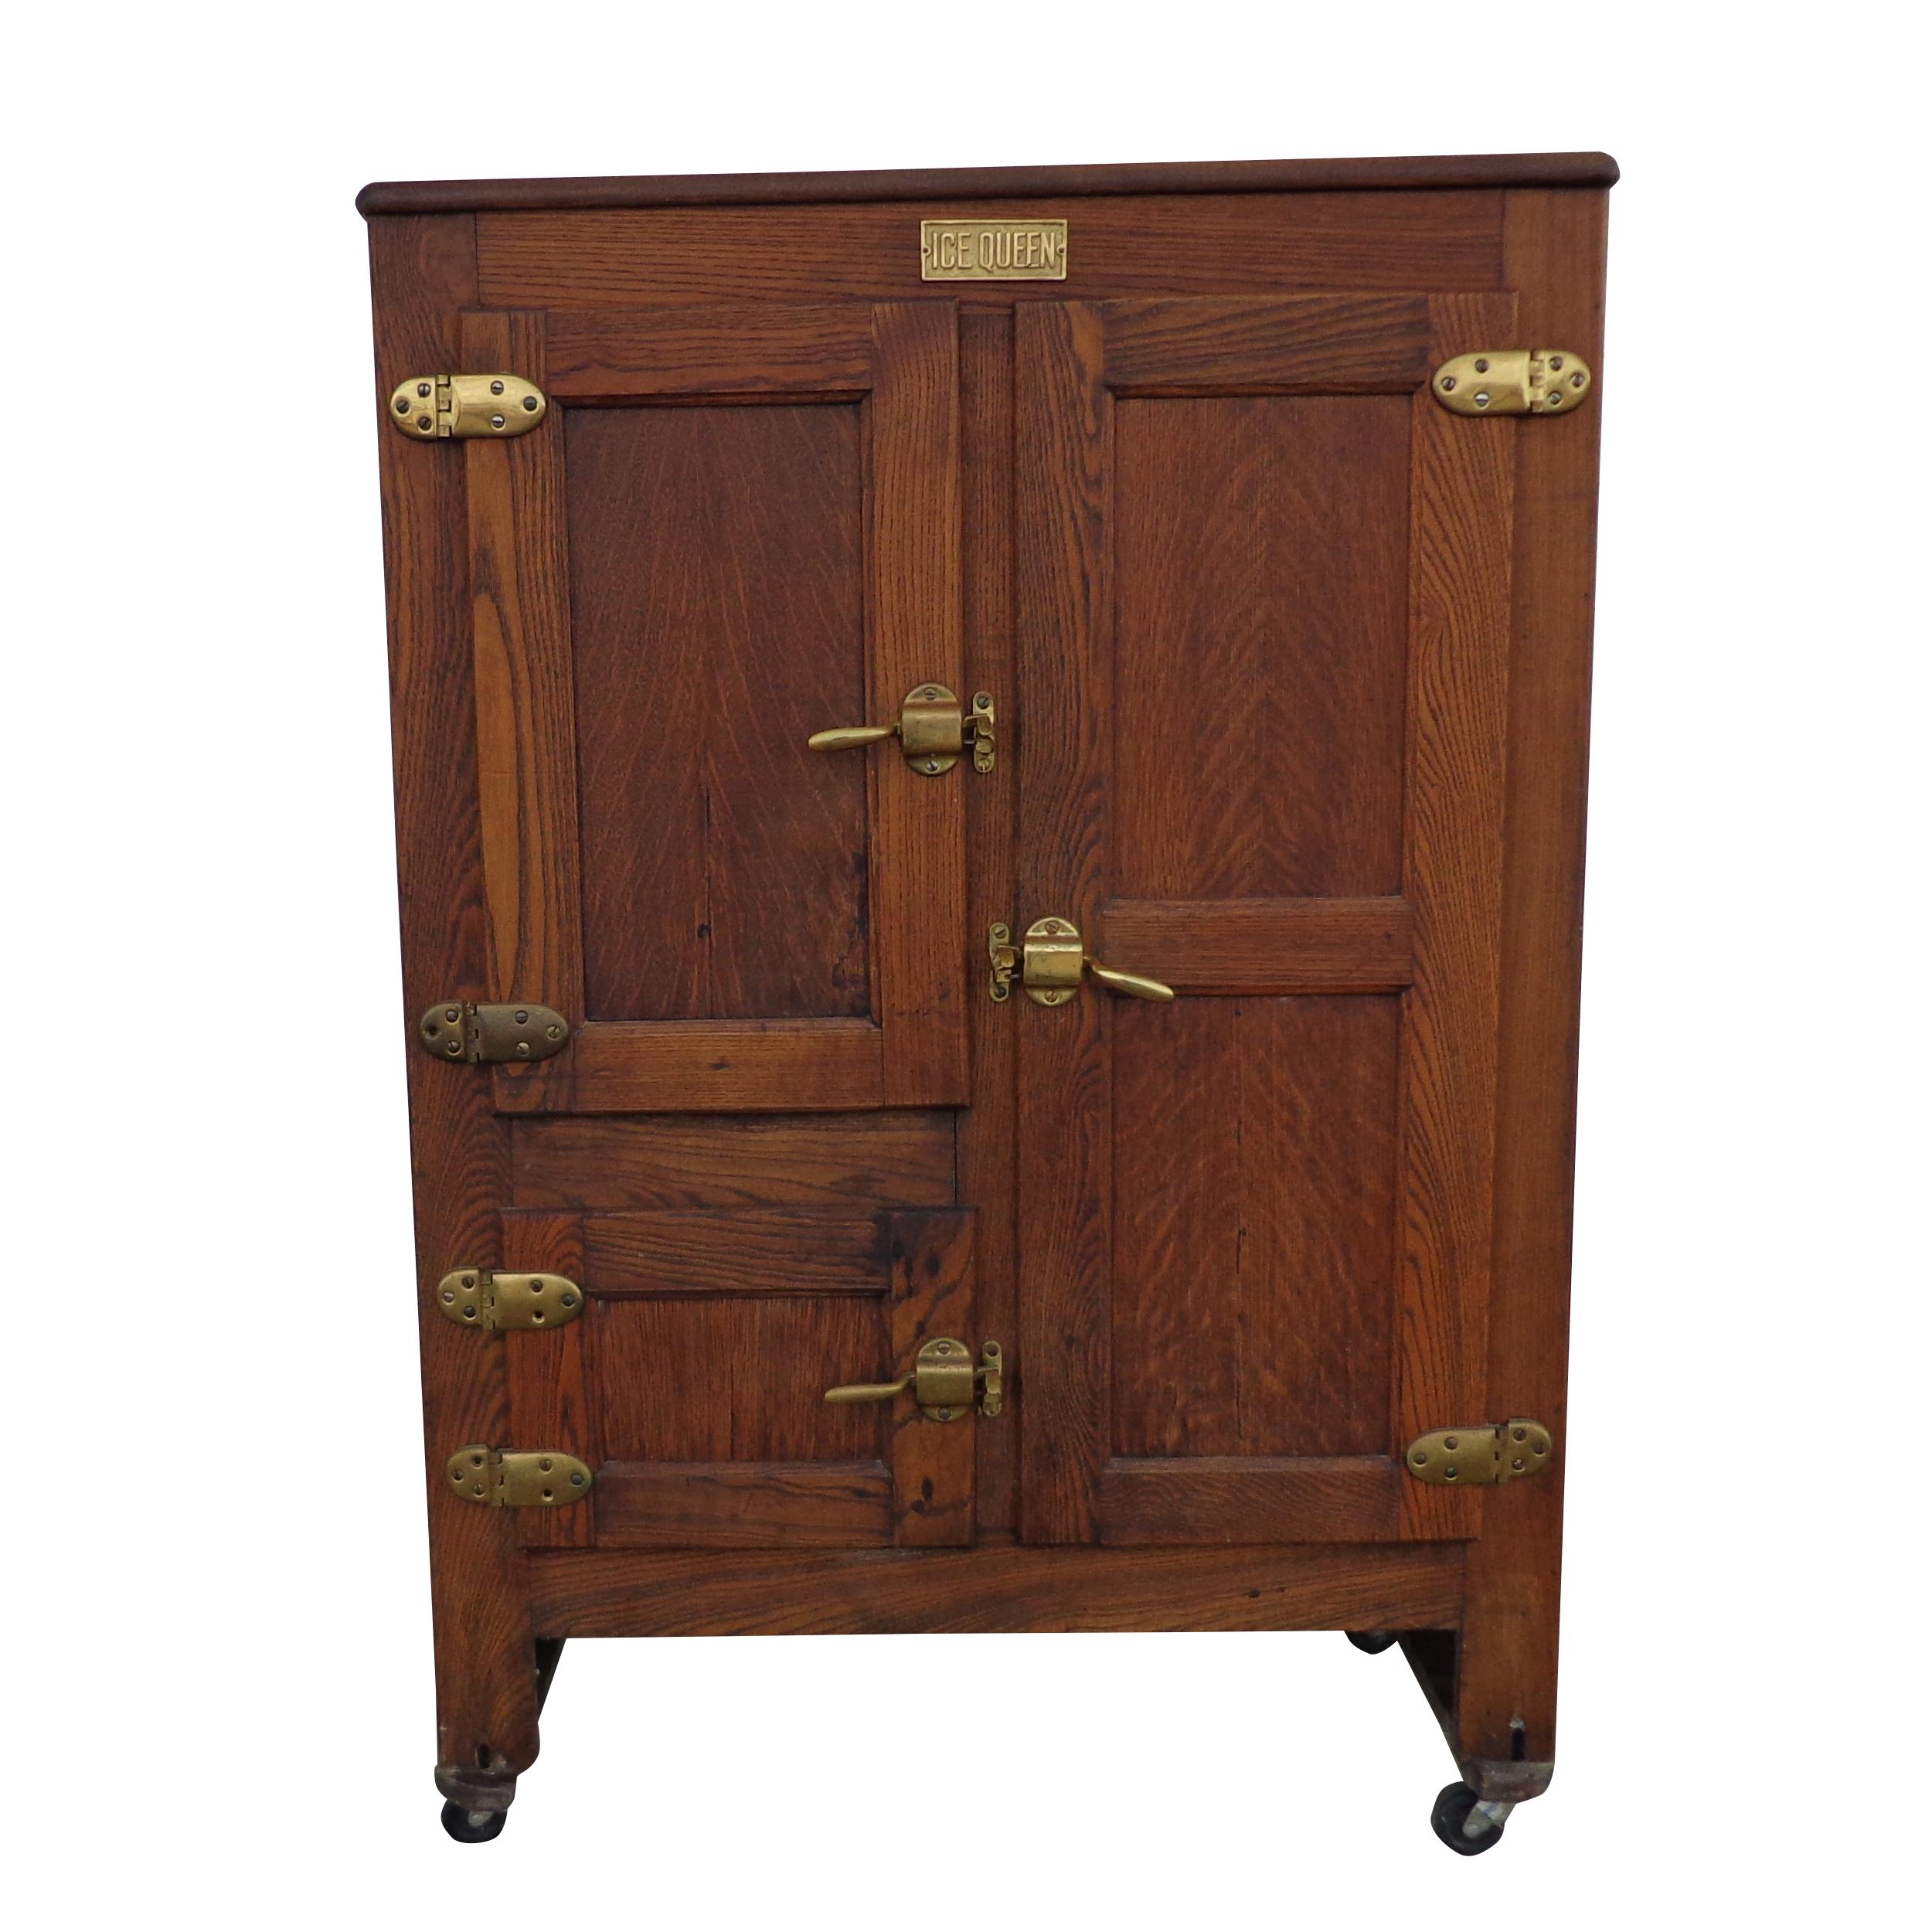 Mid-20th Century Antique Oak Ice Box Wine Cabinet by Ice Queen